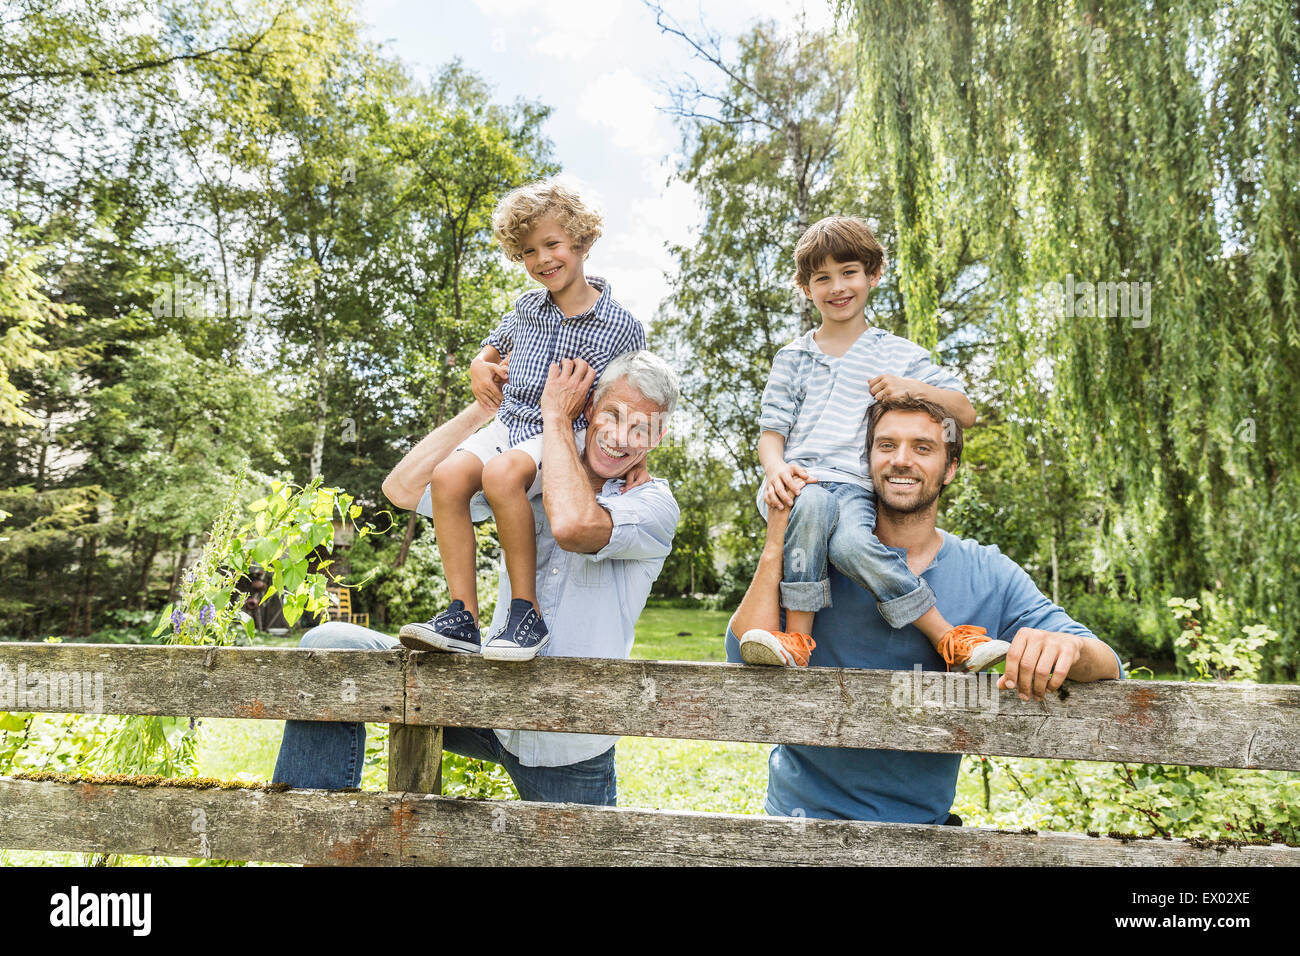 Portrait of three generation family males in garden Stock Photo